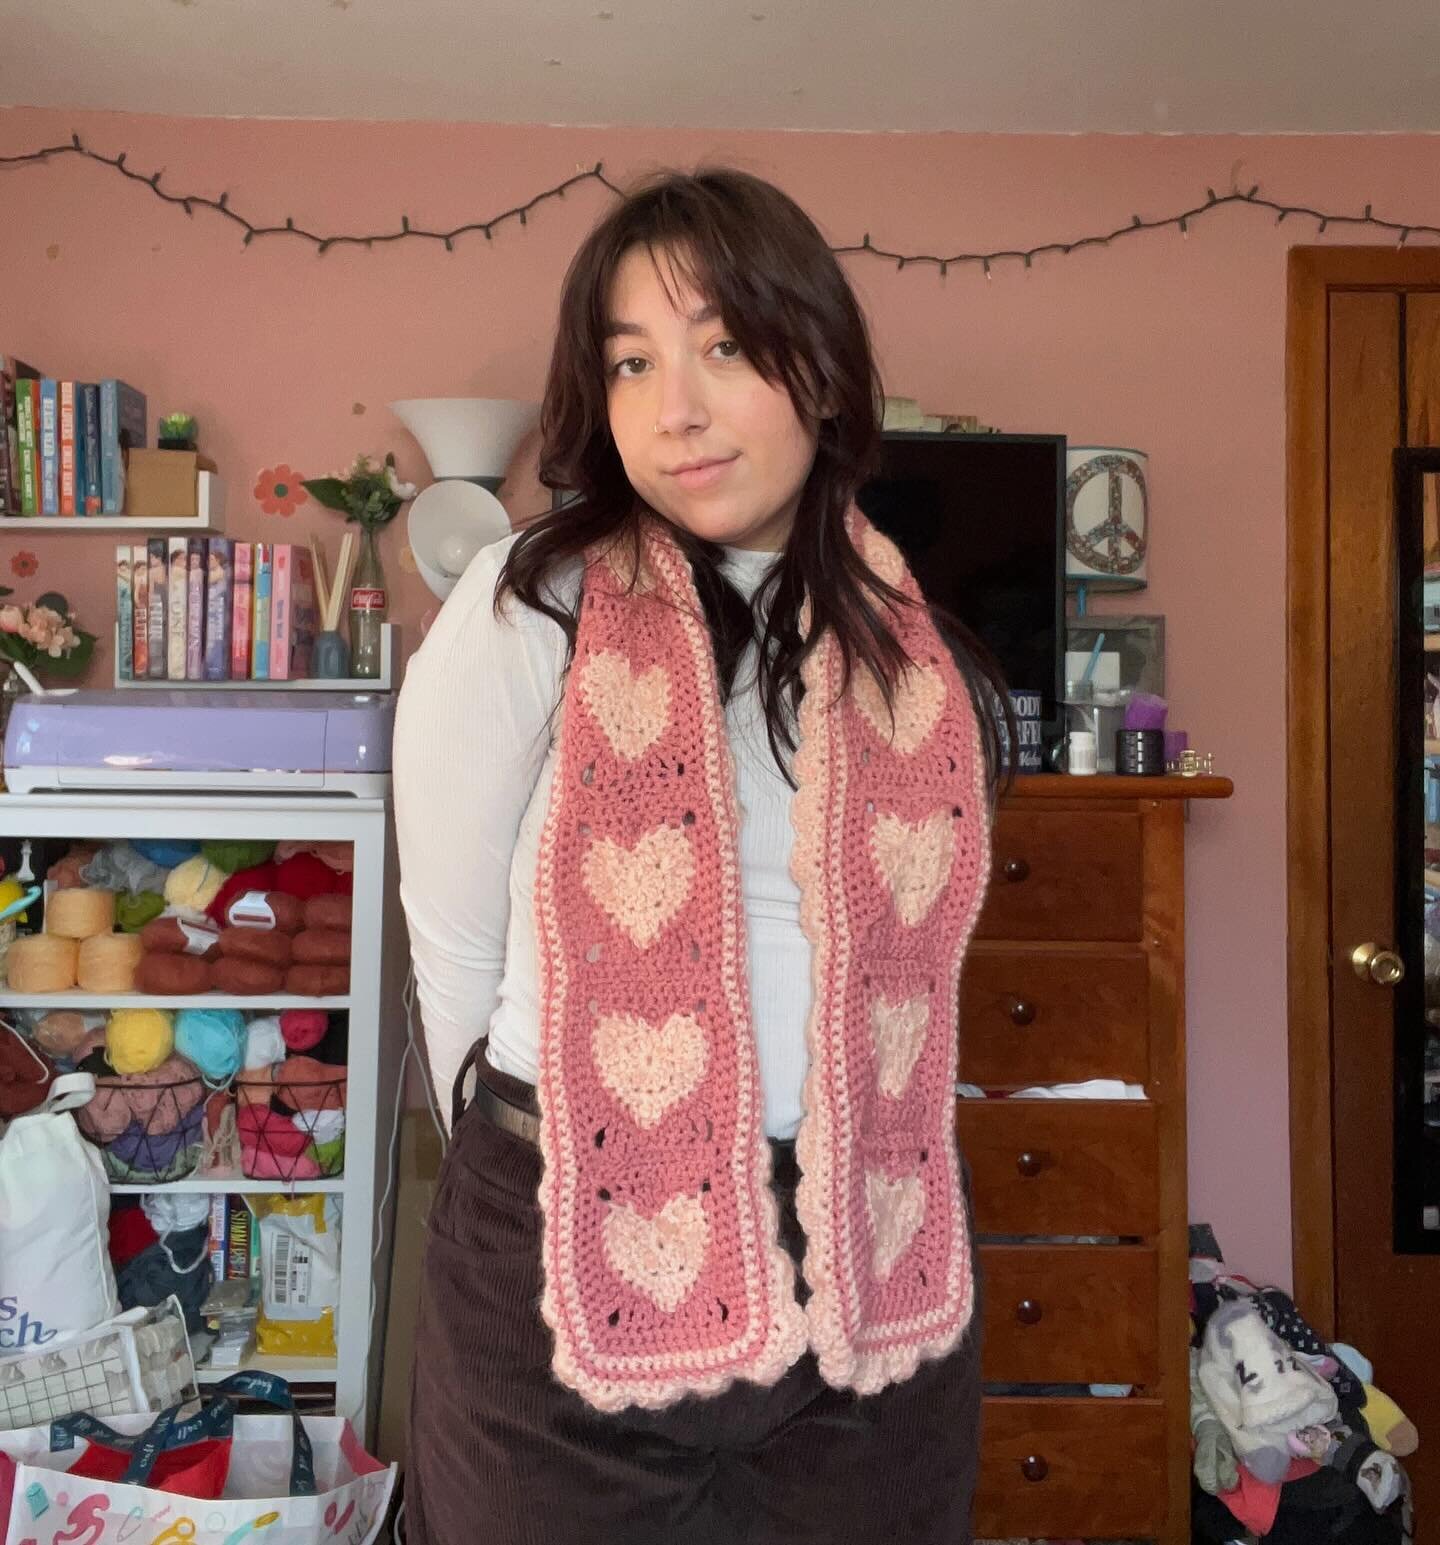 the valentine&rsquo;s scarf 💘🎀💓💋🩷 

i had an idea to do a scallop edged scarf for months now and couldn&rsquo;t figure out how i wanted to actually make it. but i am so happy that i thought to do a little valentine&rsquo;s moment with the heart 